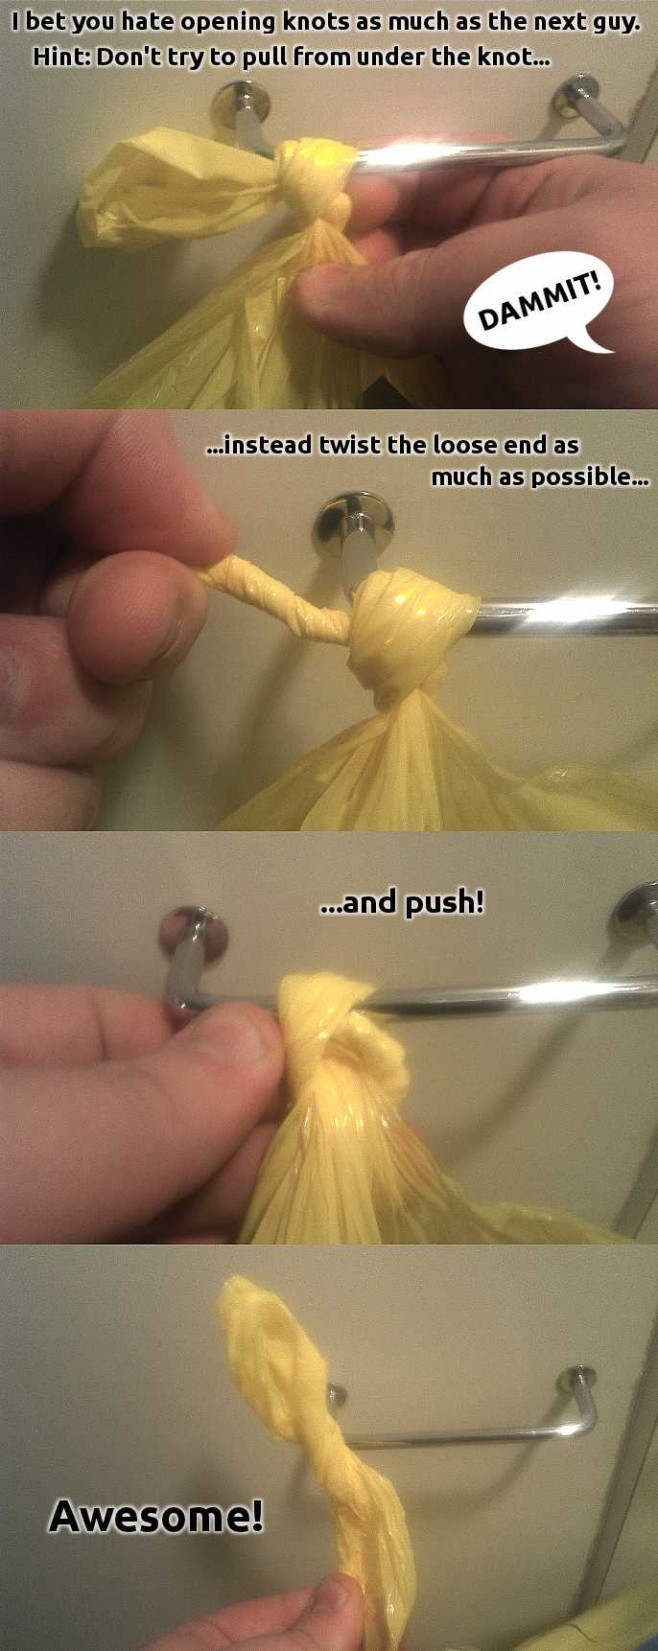 How to open nearly any knot